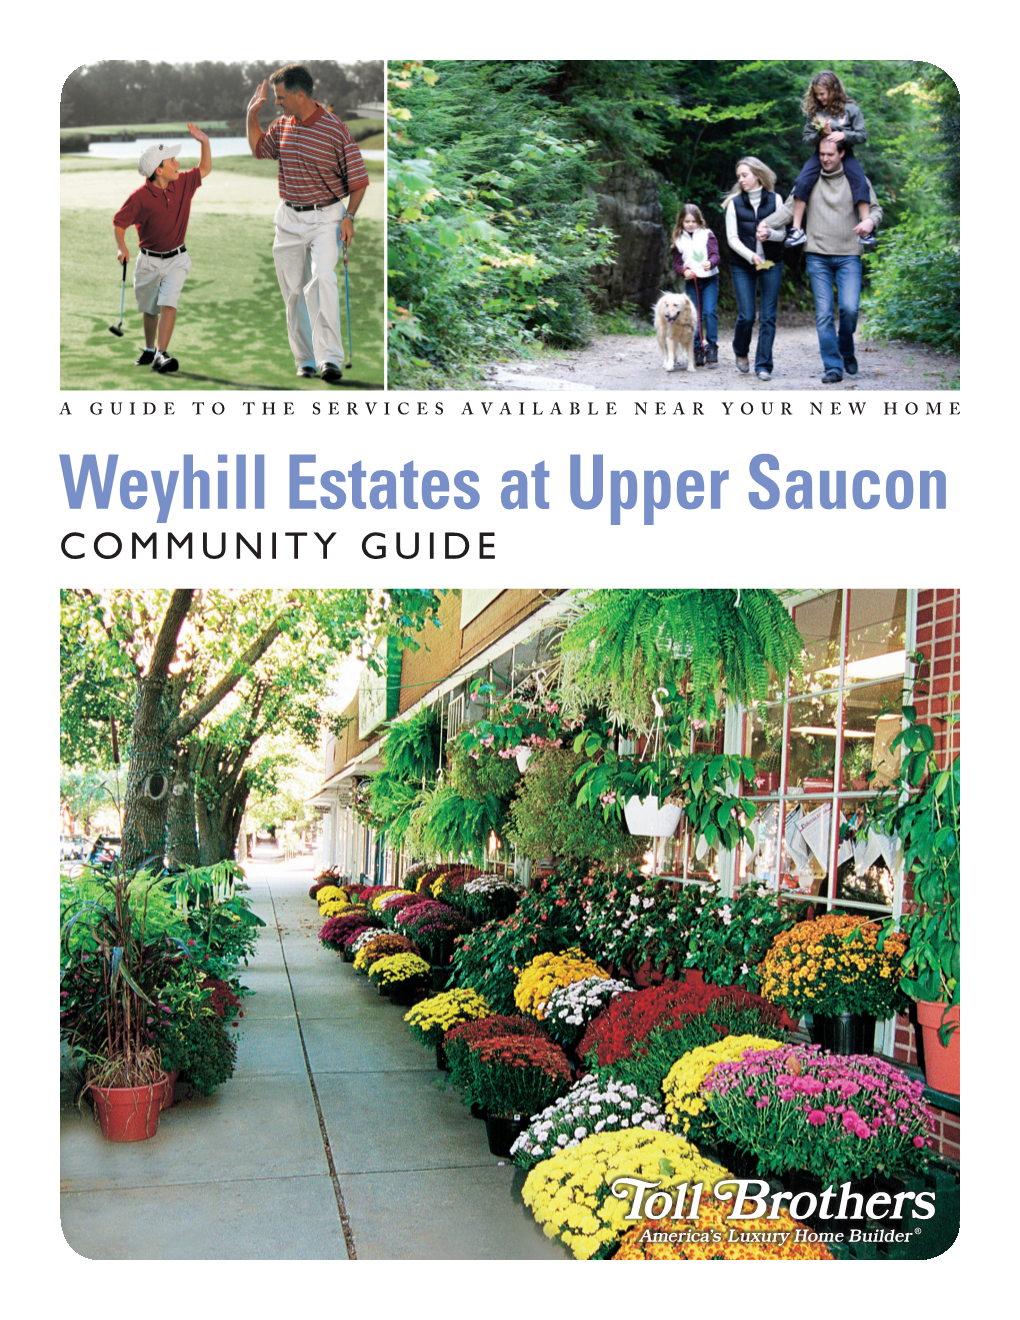 Weyhill Estates at Upper Saucon COMMUNITY GUIDE Copyright 2012 Toll Brothers, Inc